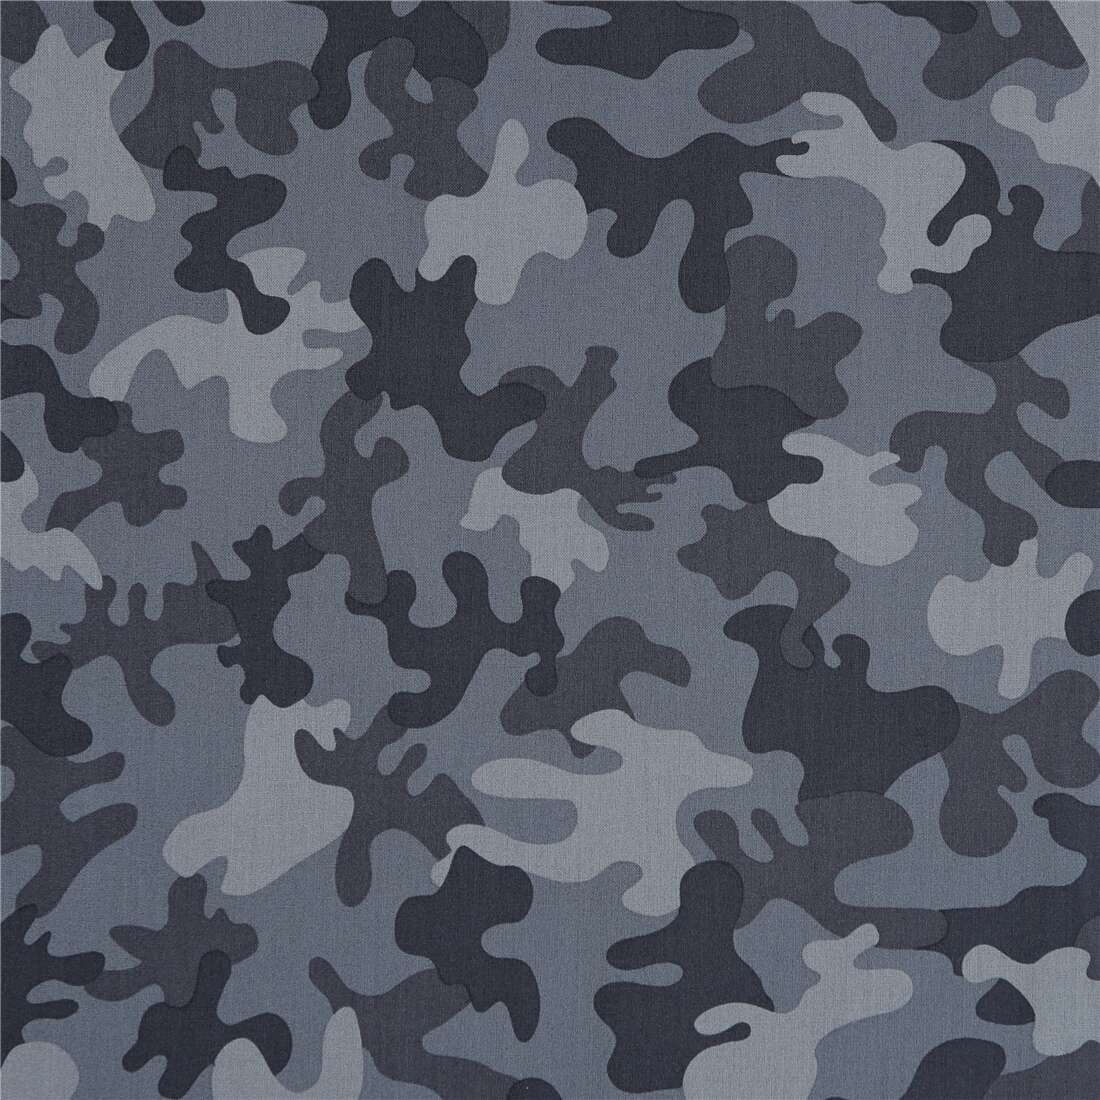 Incognito camo grey SHR alignsthe fabric seems thinner than the